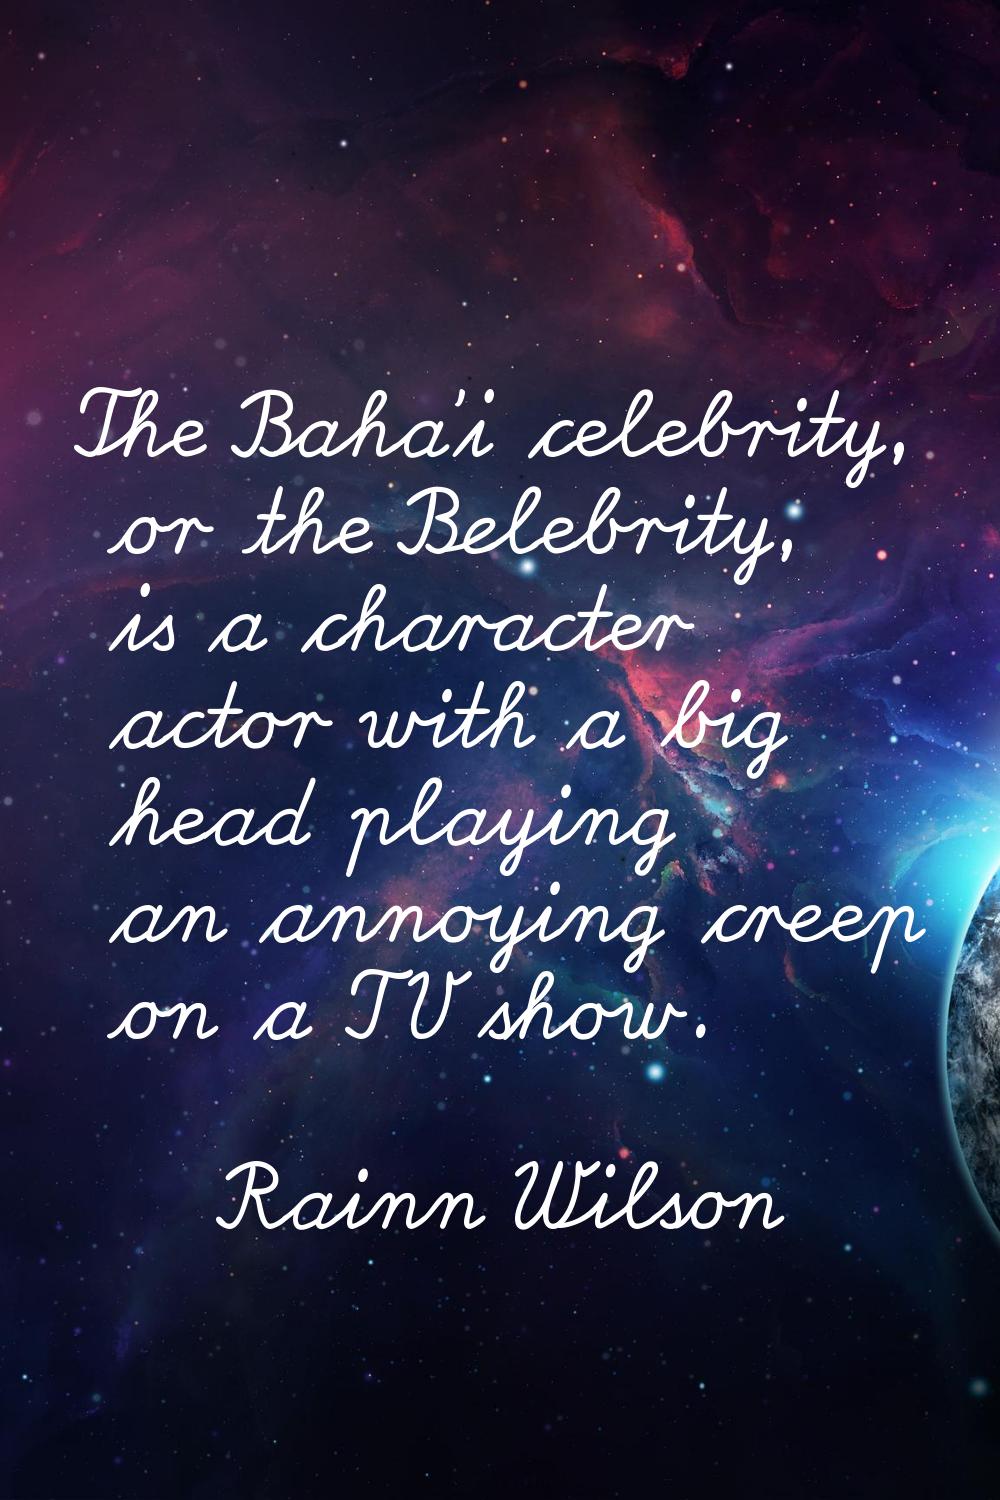 The Baha'i celebrity, or the Belebrity, is a character actor with a big head playing an annoying cr